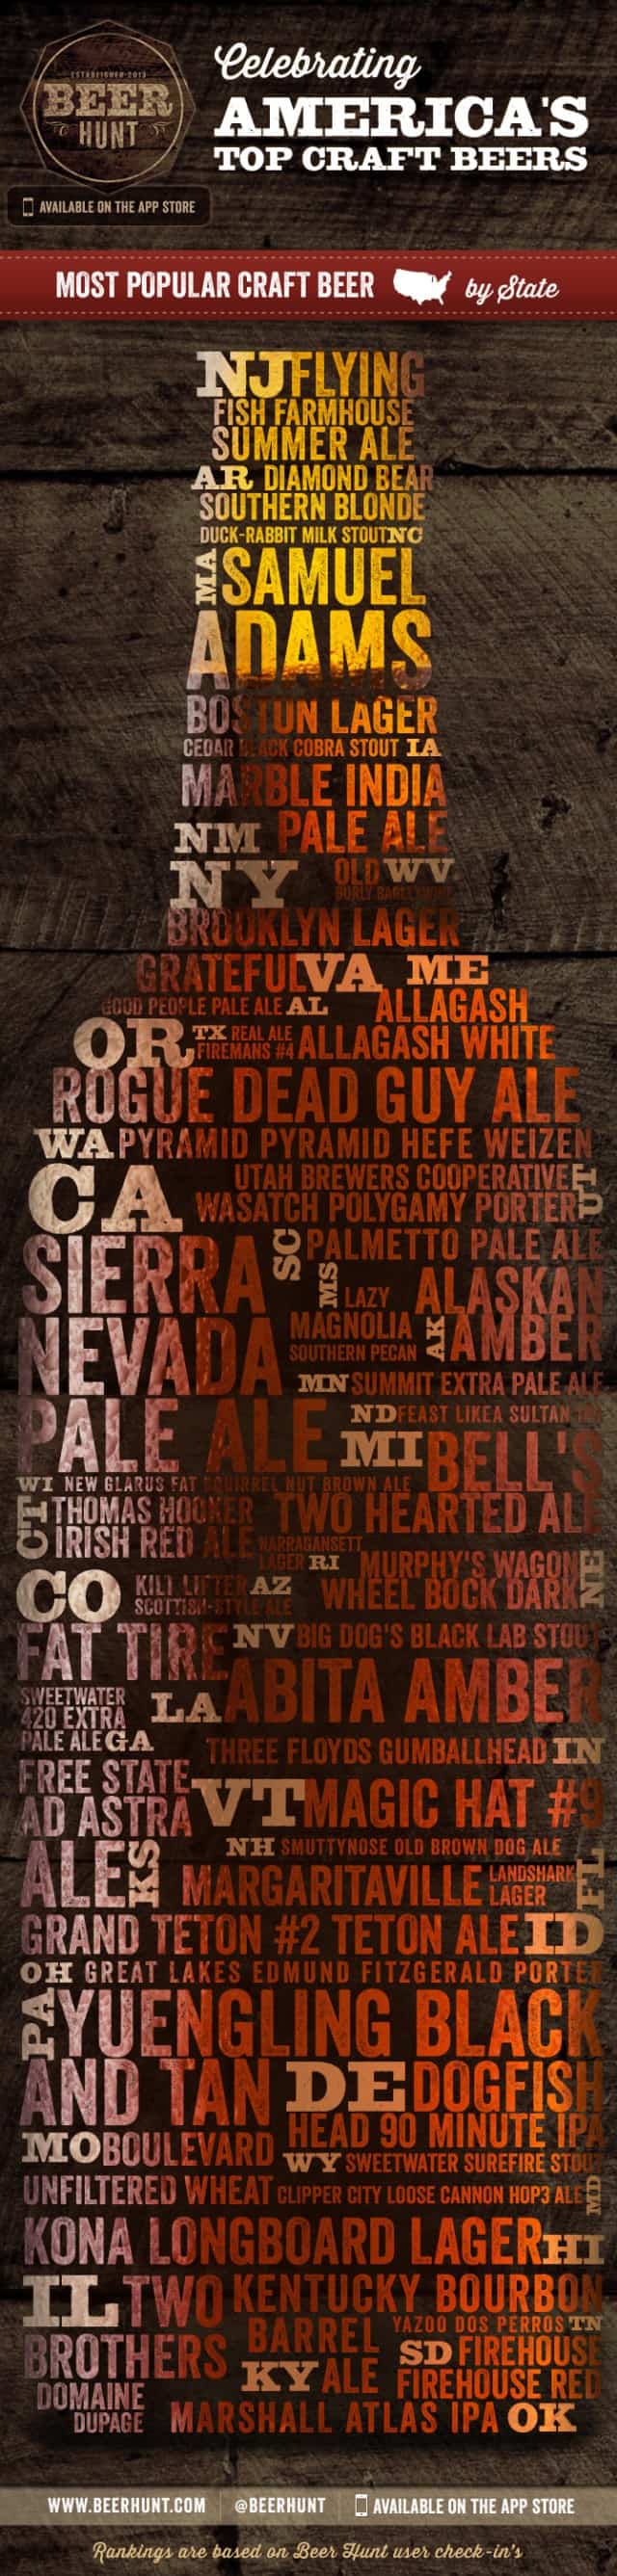 Most Popular Craft Beer By State